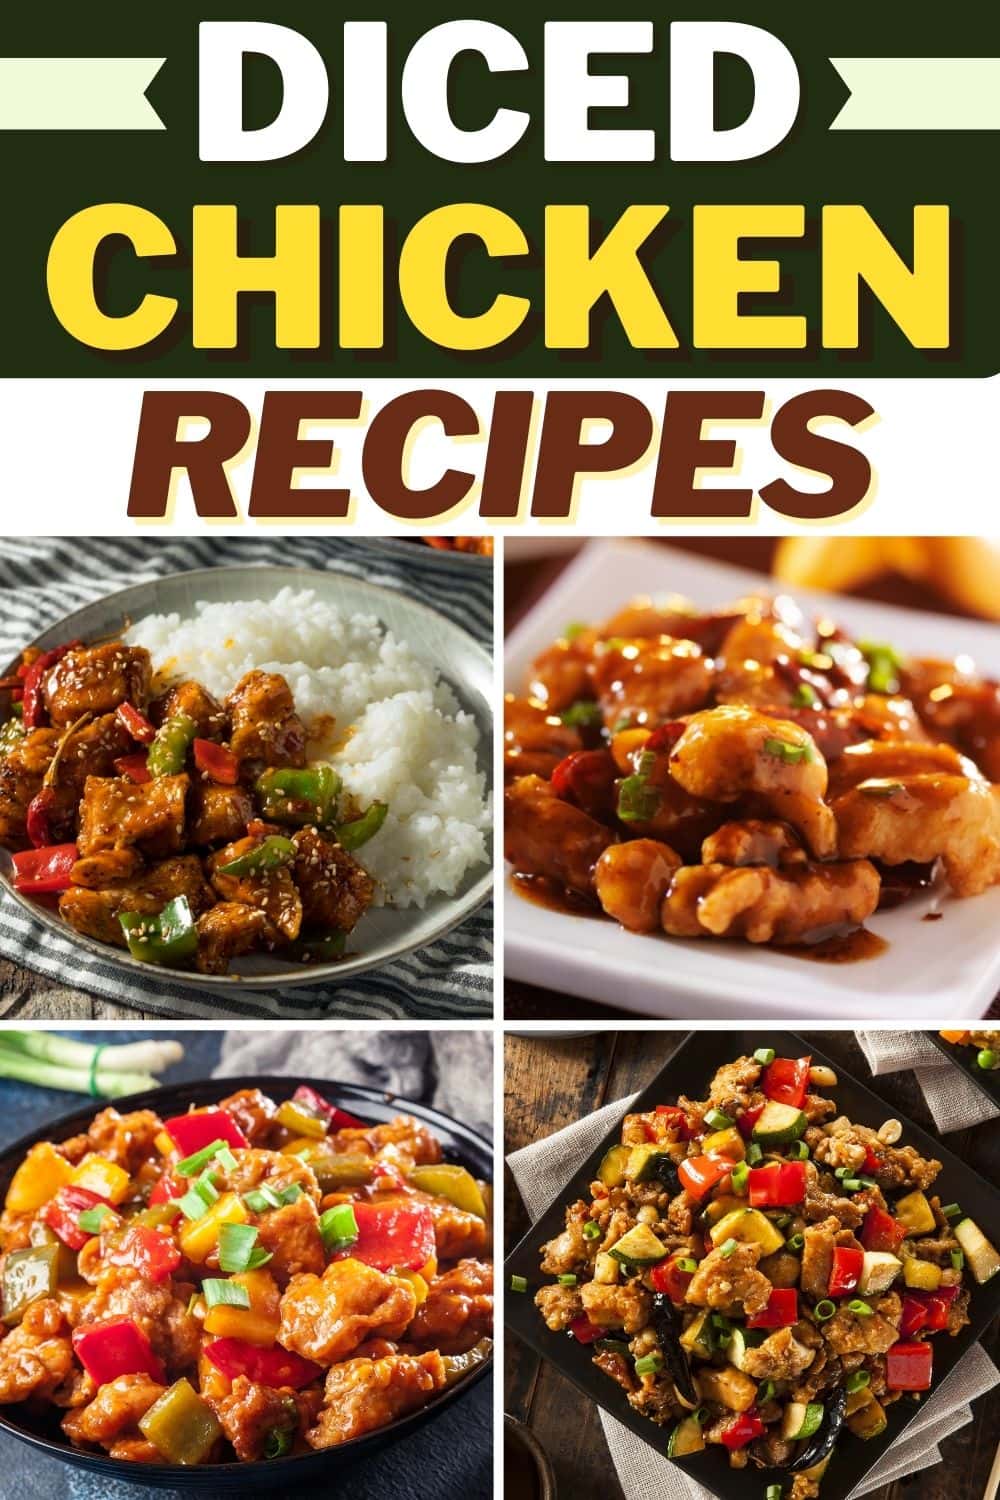 25 Easy Diced Chicken Recipes You’ll Love - Insanely Good